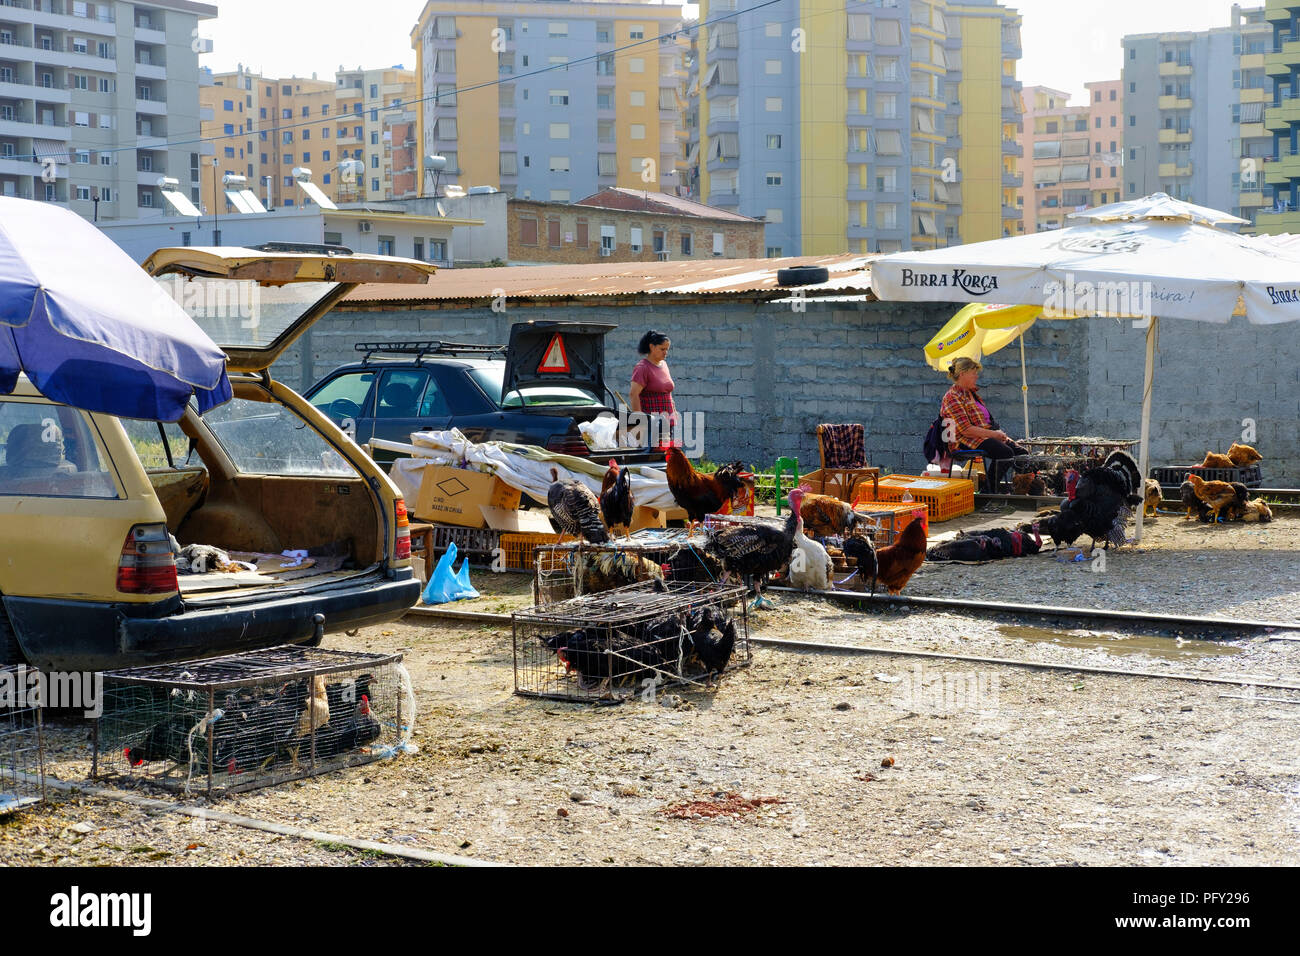 Chickens in cages for sale, improvised market, Fier, Qarier Fier, Albania Stock Photo